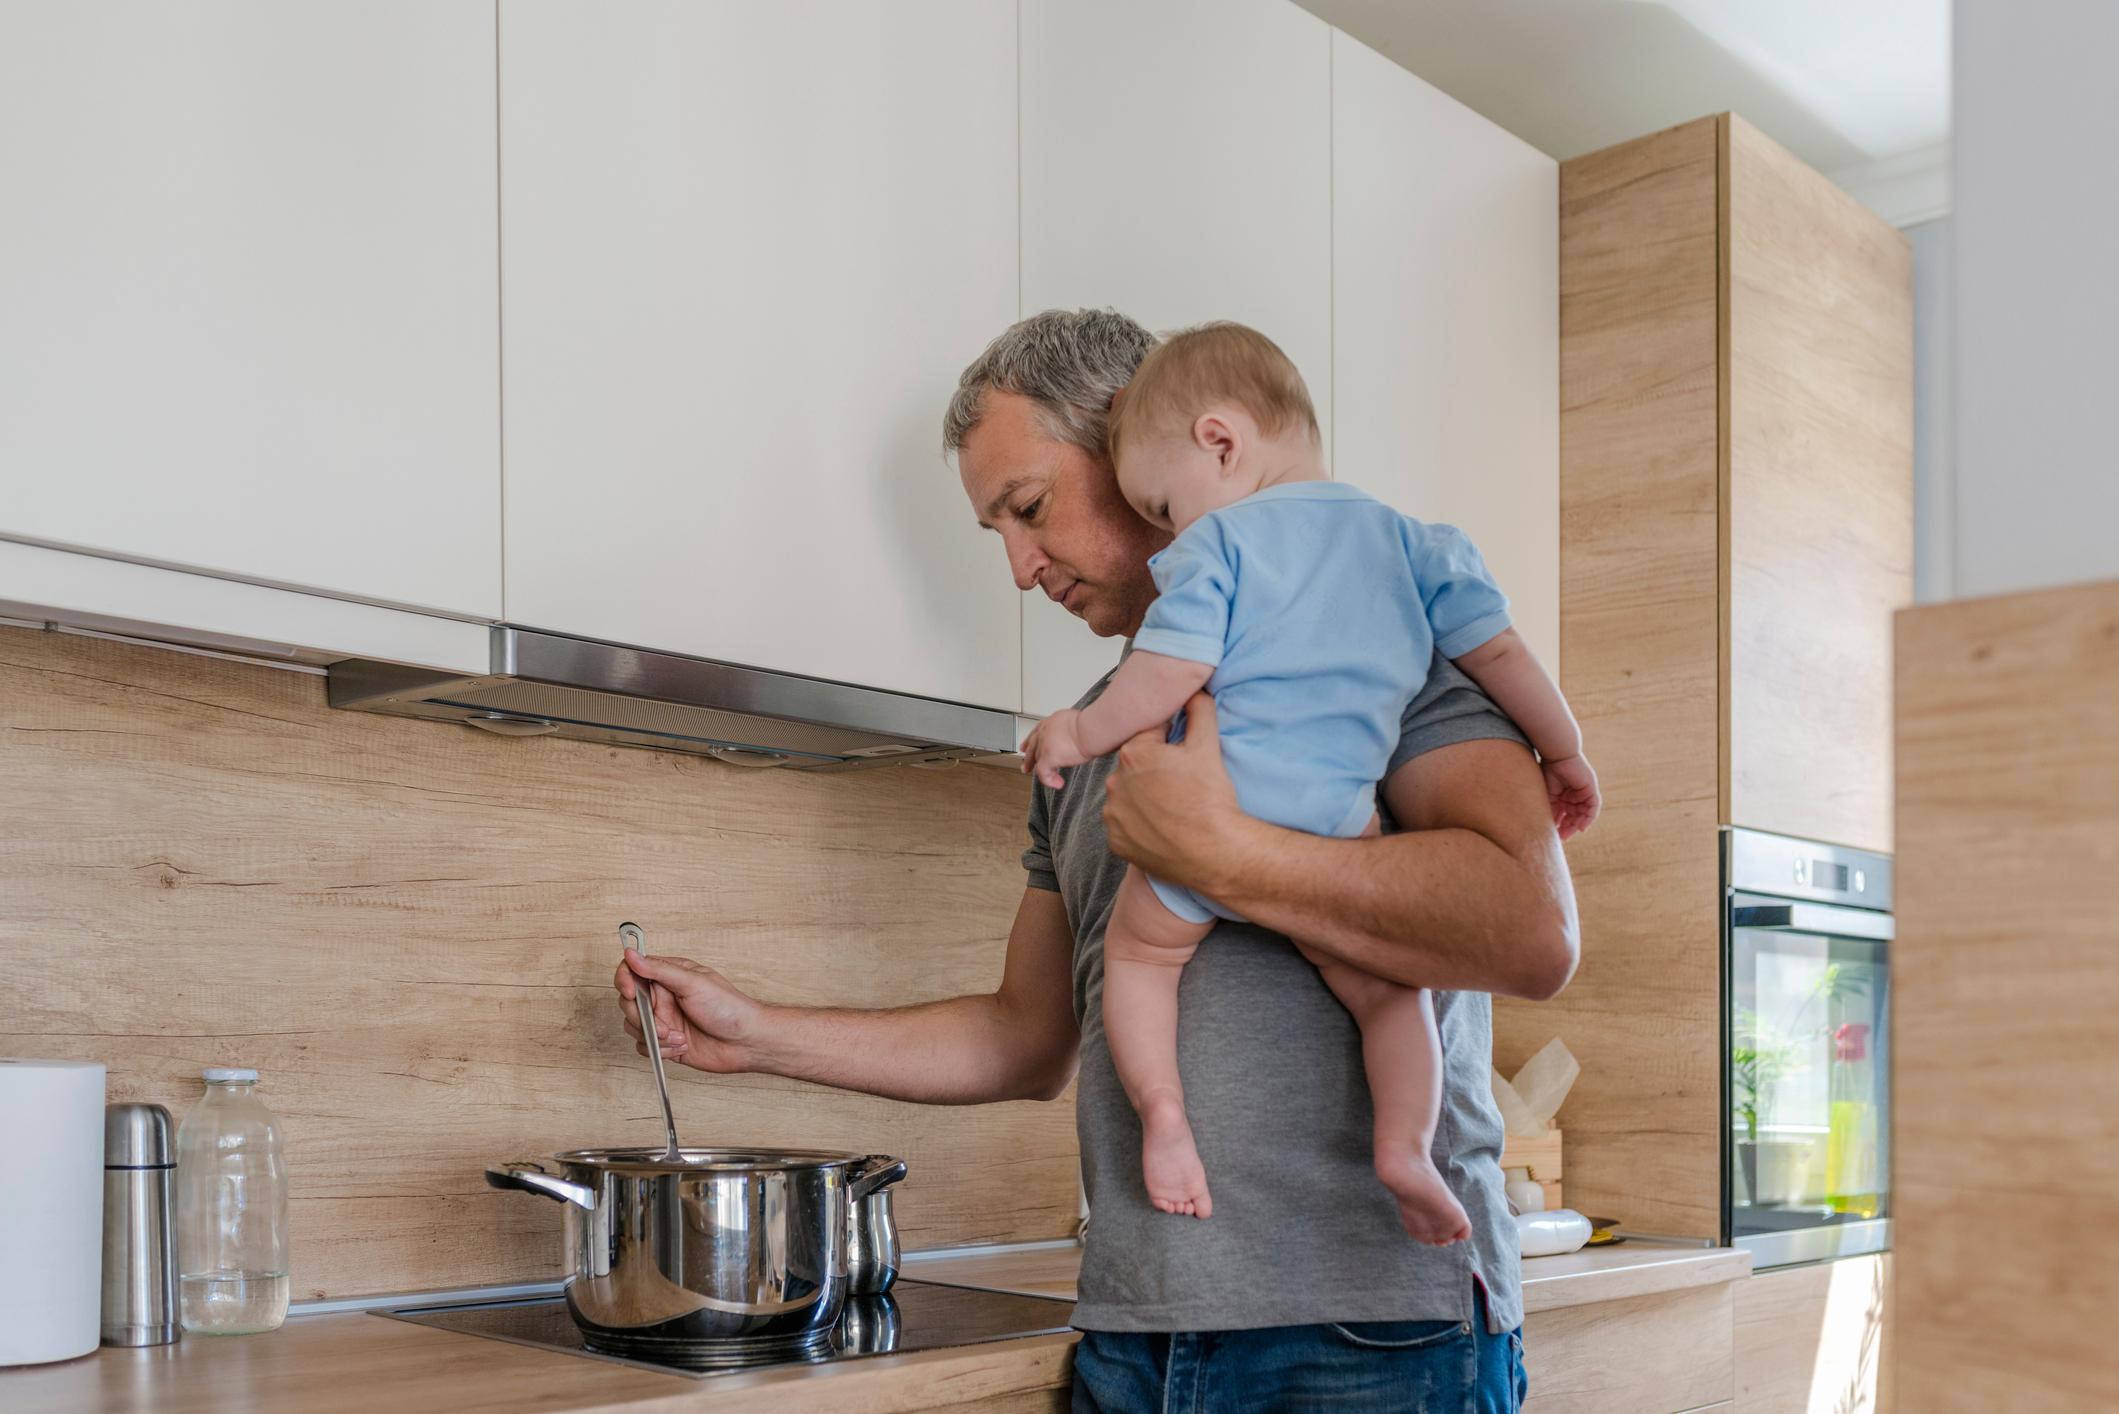 Father in a kitchen holding a child on his shoulder, cooking.